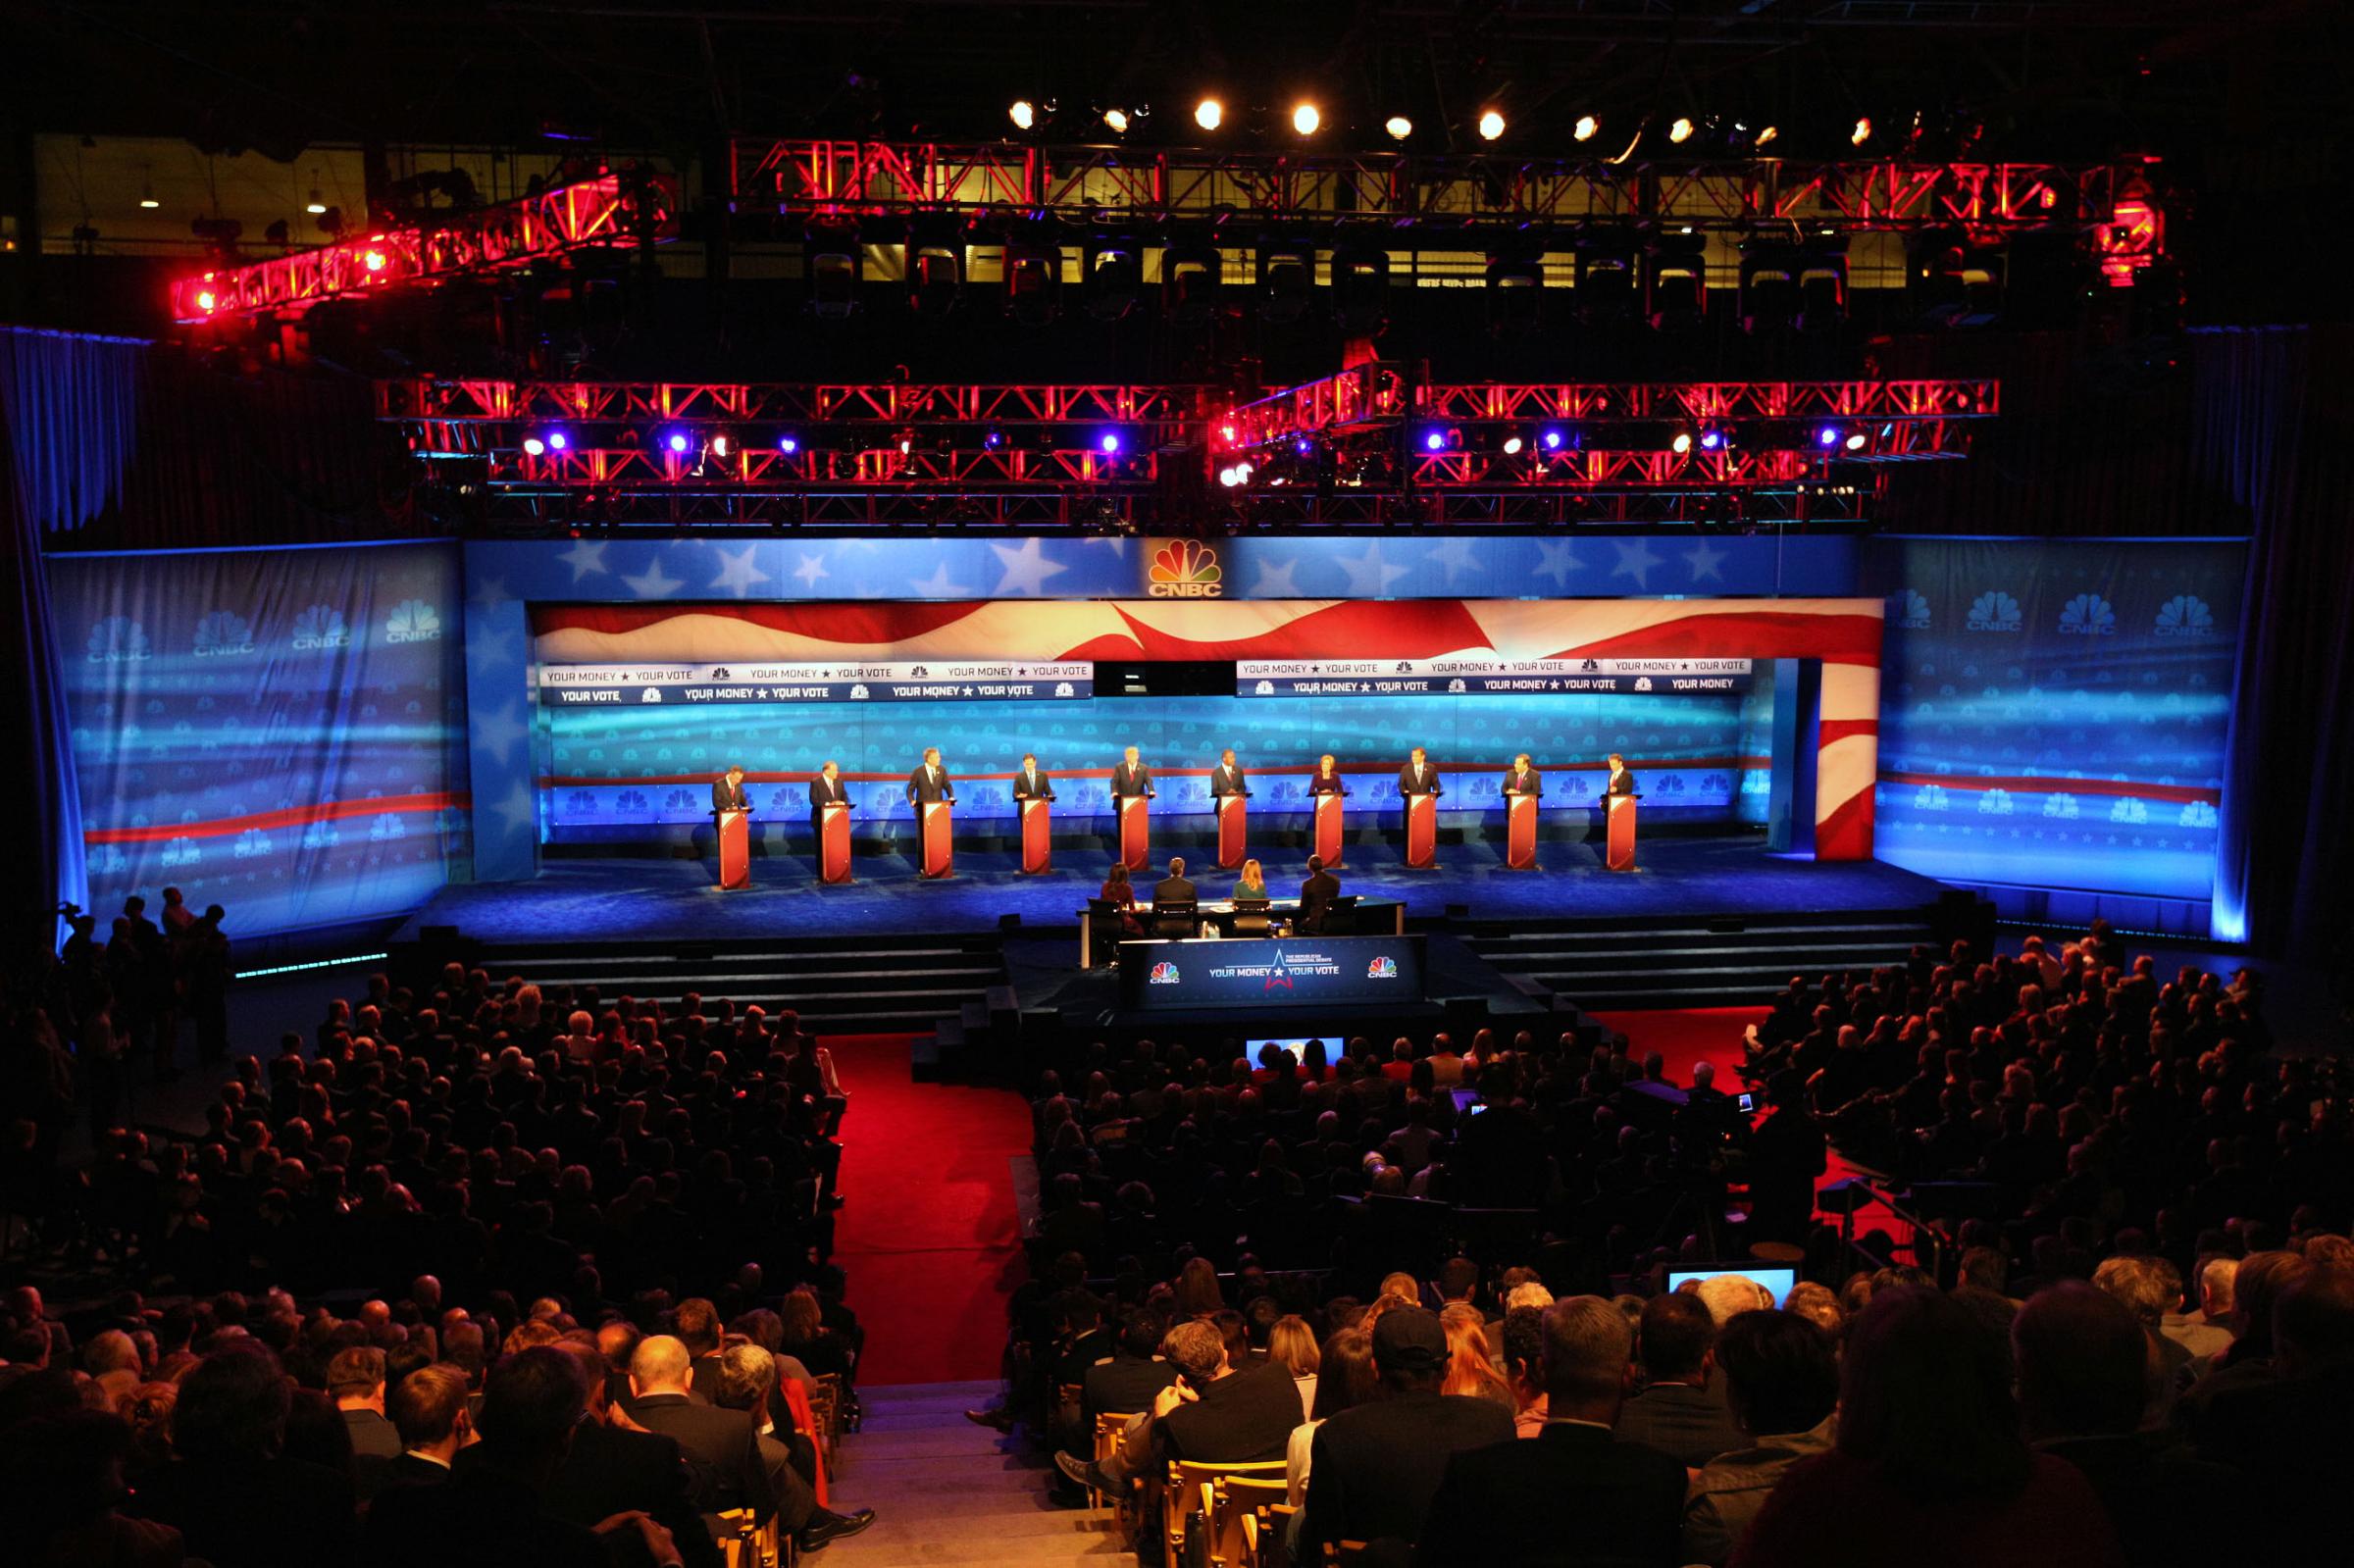 The Republican presidential debate at the University of Colorado Boulder in Boulder, Colo. on Oct. 28, 2015.